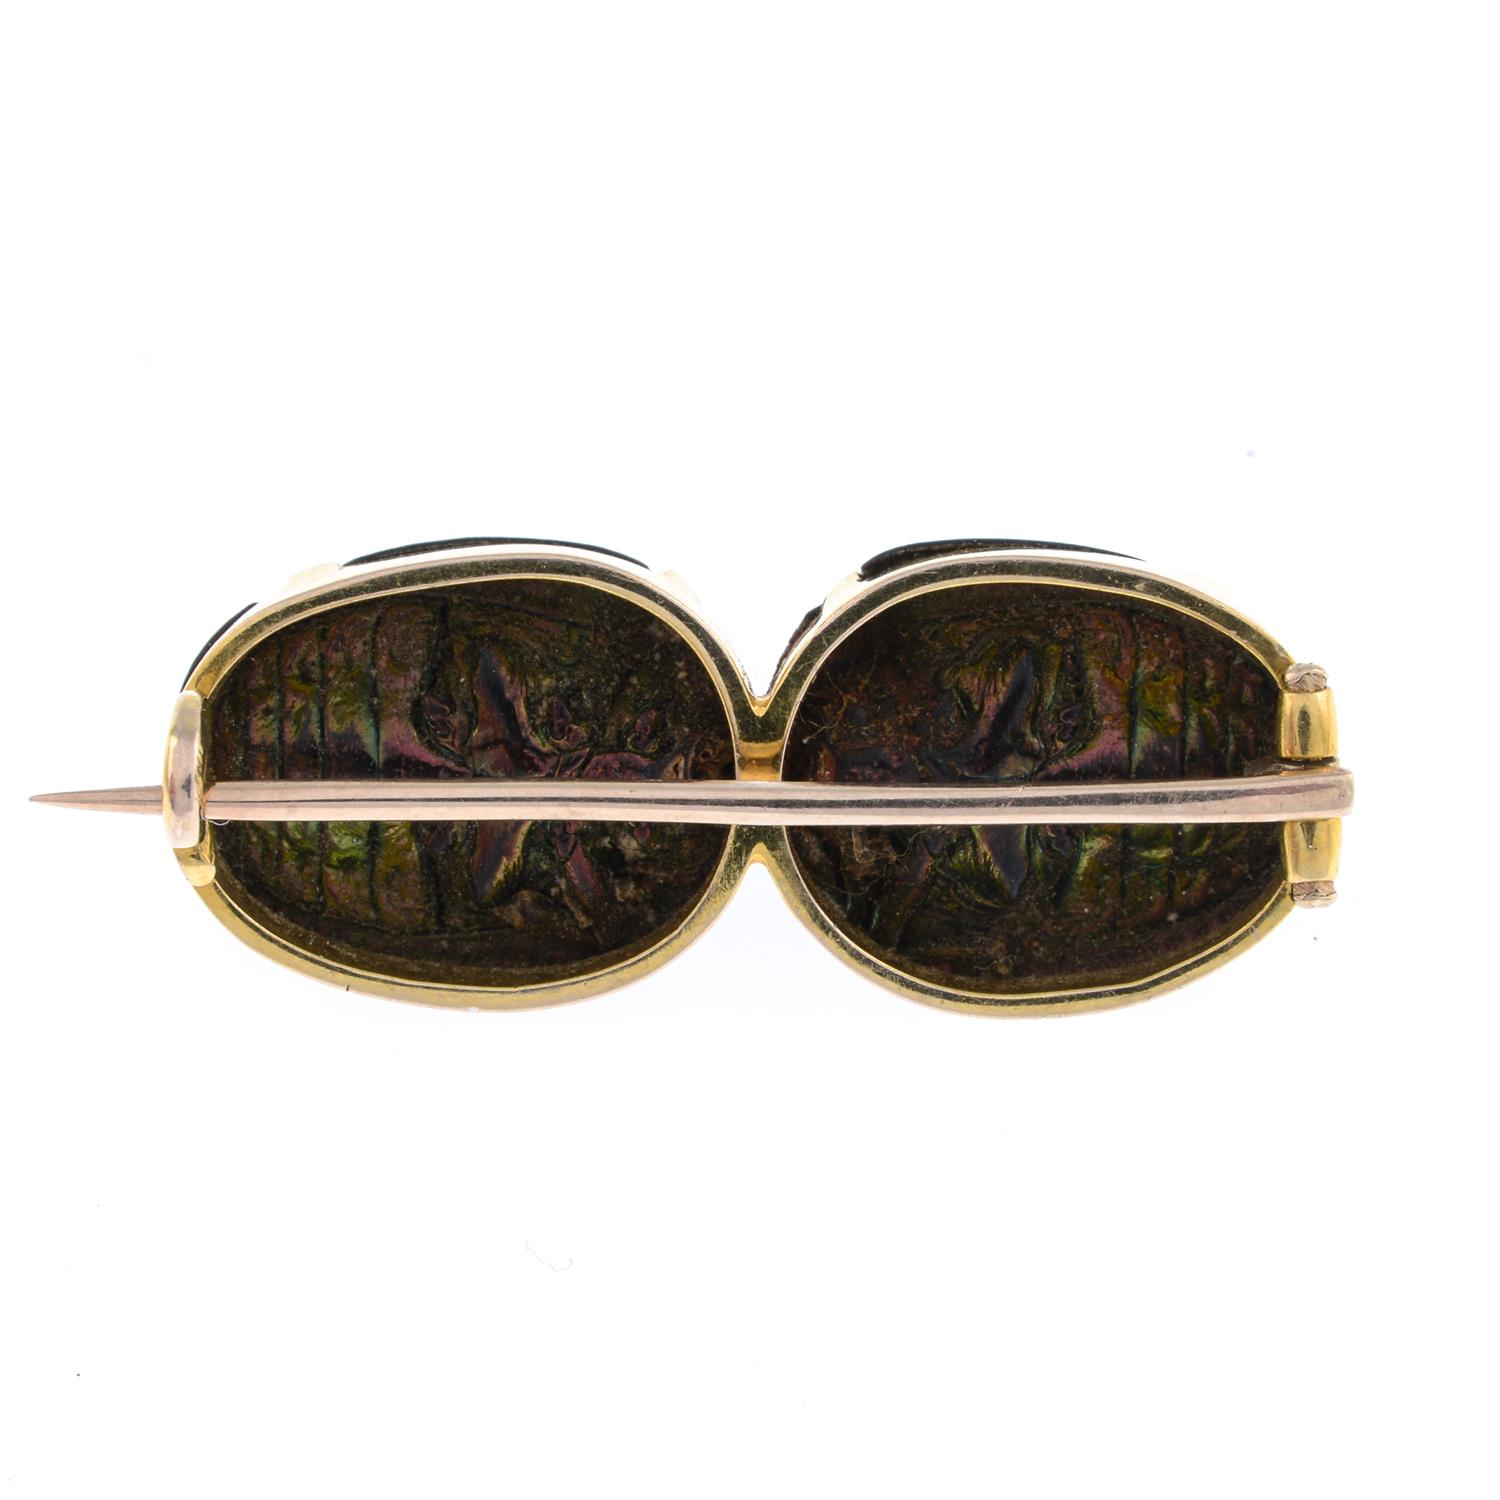 Early 20th century scarab beetle brooch - Image 2 of 2